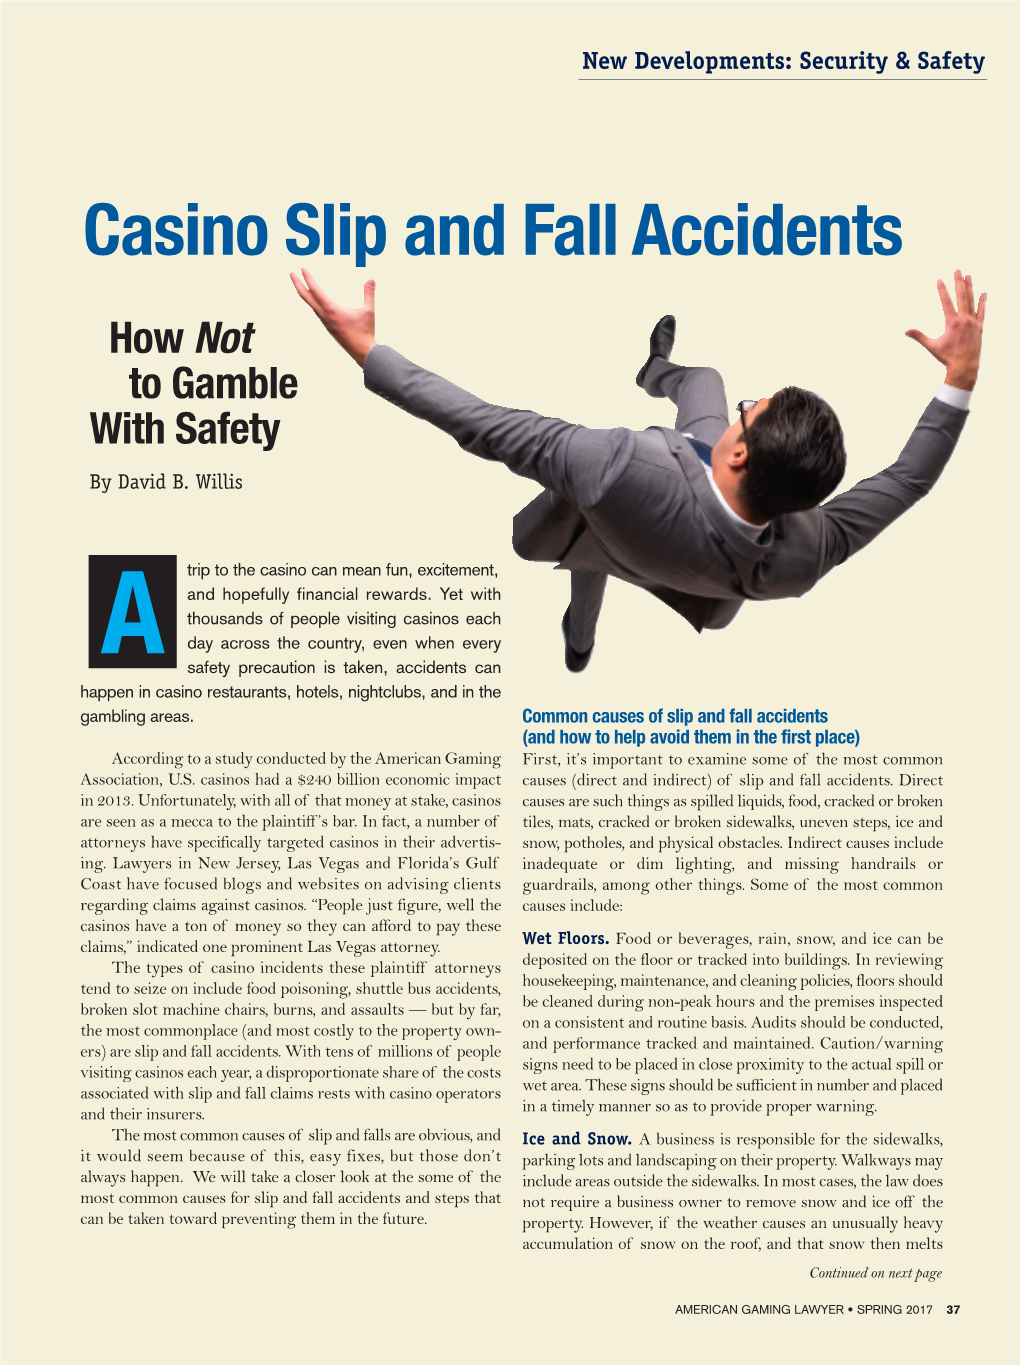 Casino Slip and Fall Accidents